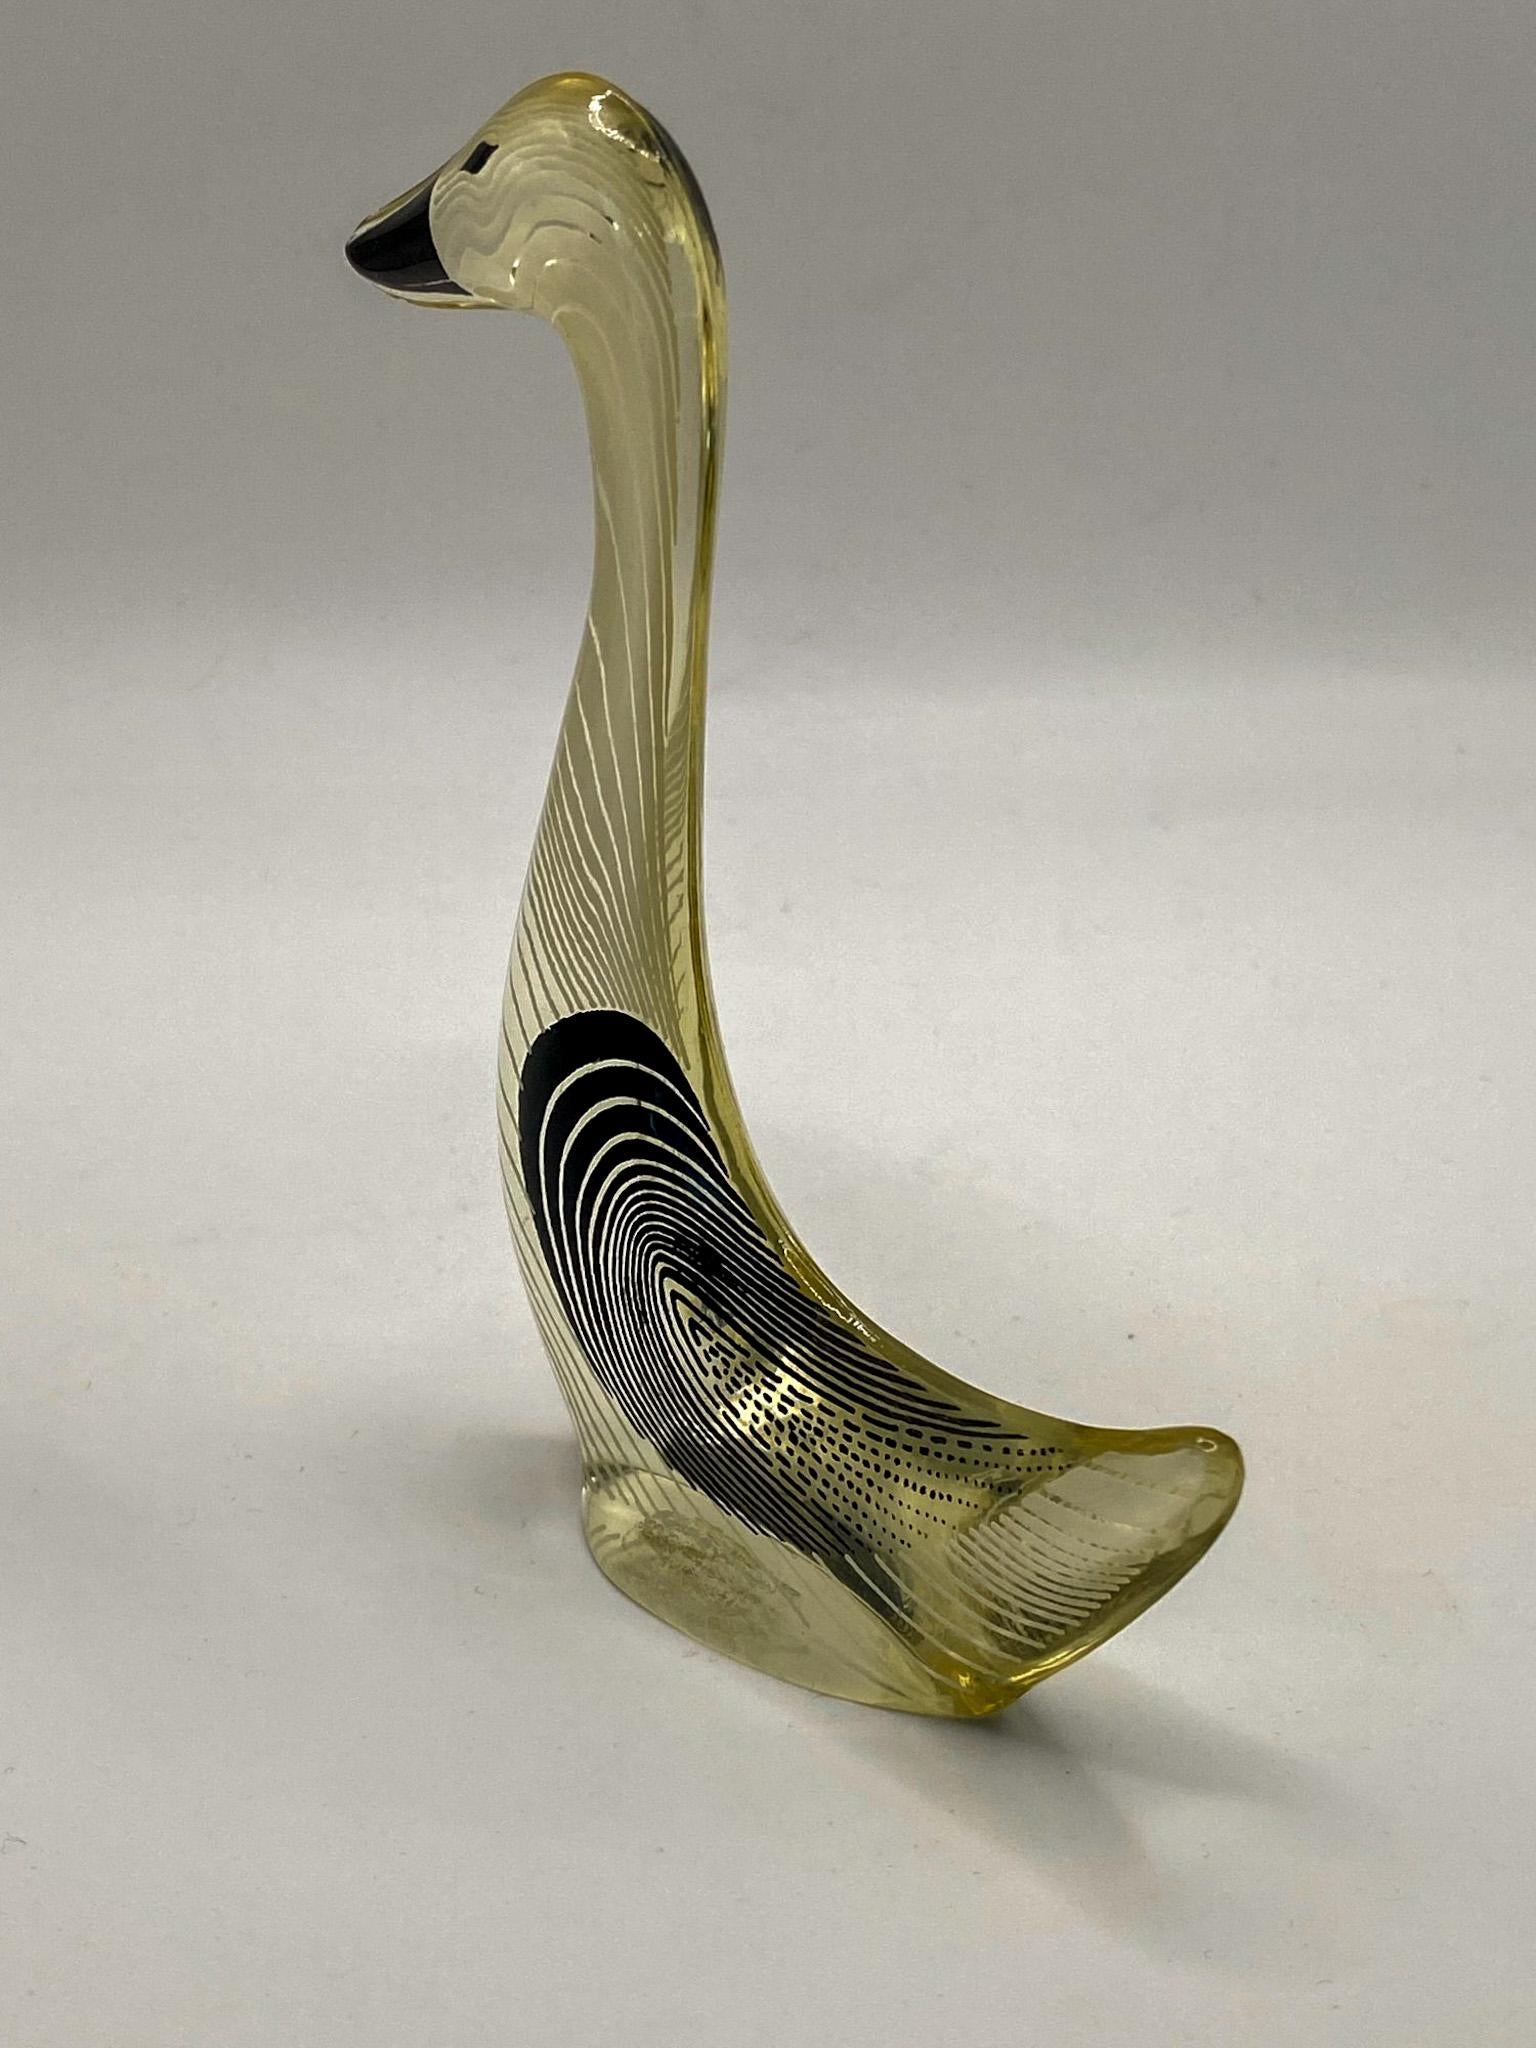 Hand-Crafted Abraham Palatnik, Goose, Kinetic Sculpture in Acrylic Resin, Brazil, C. 1960 For Sale